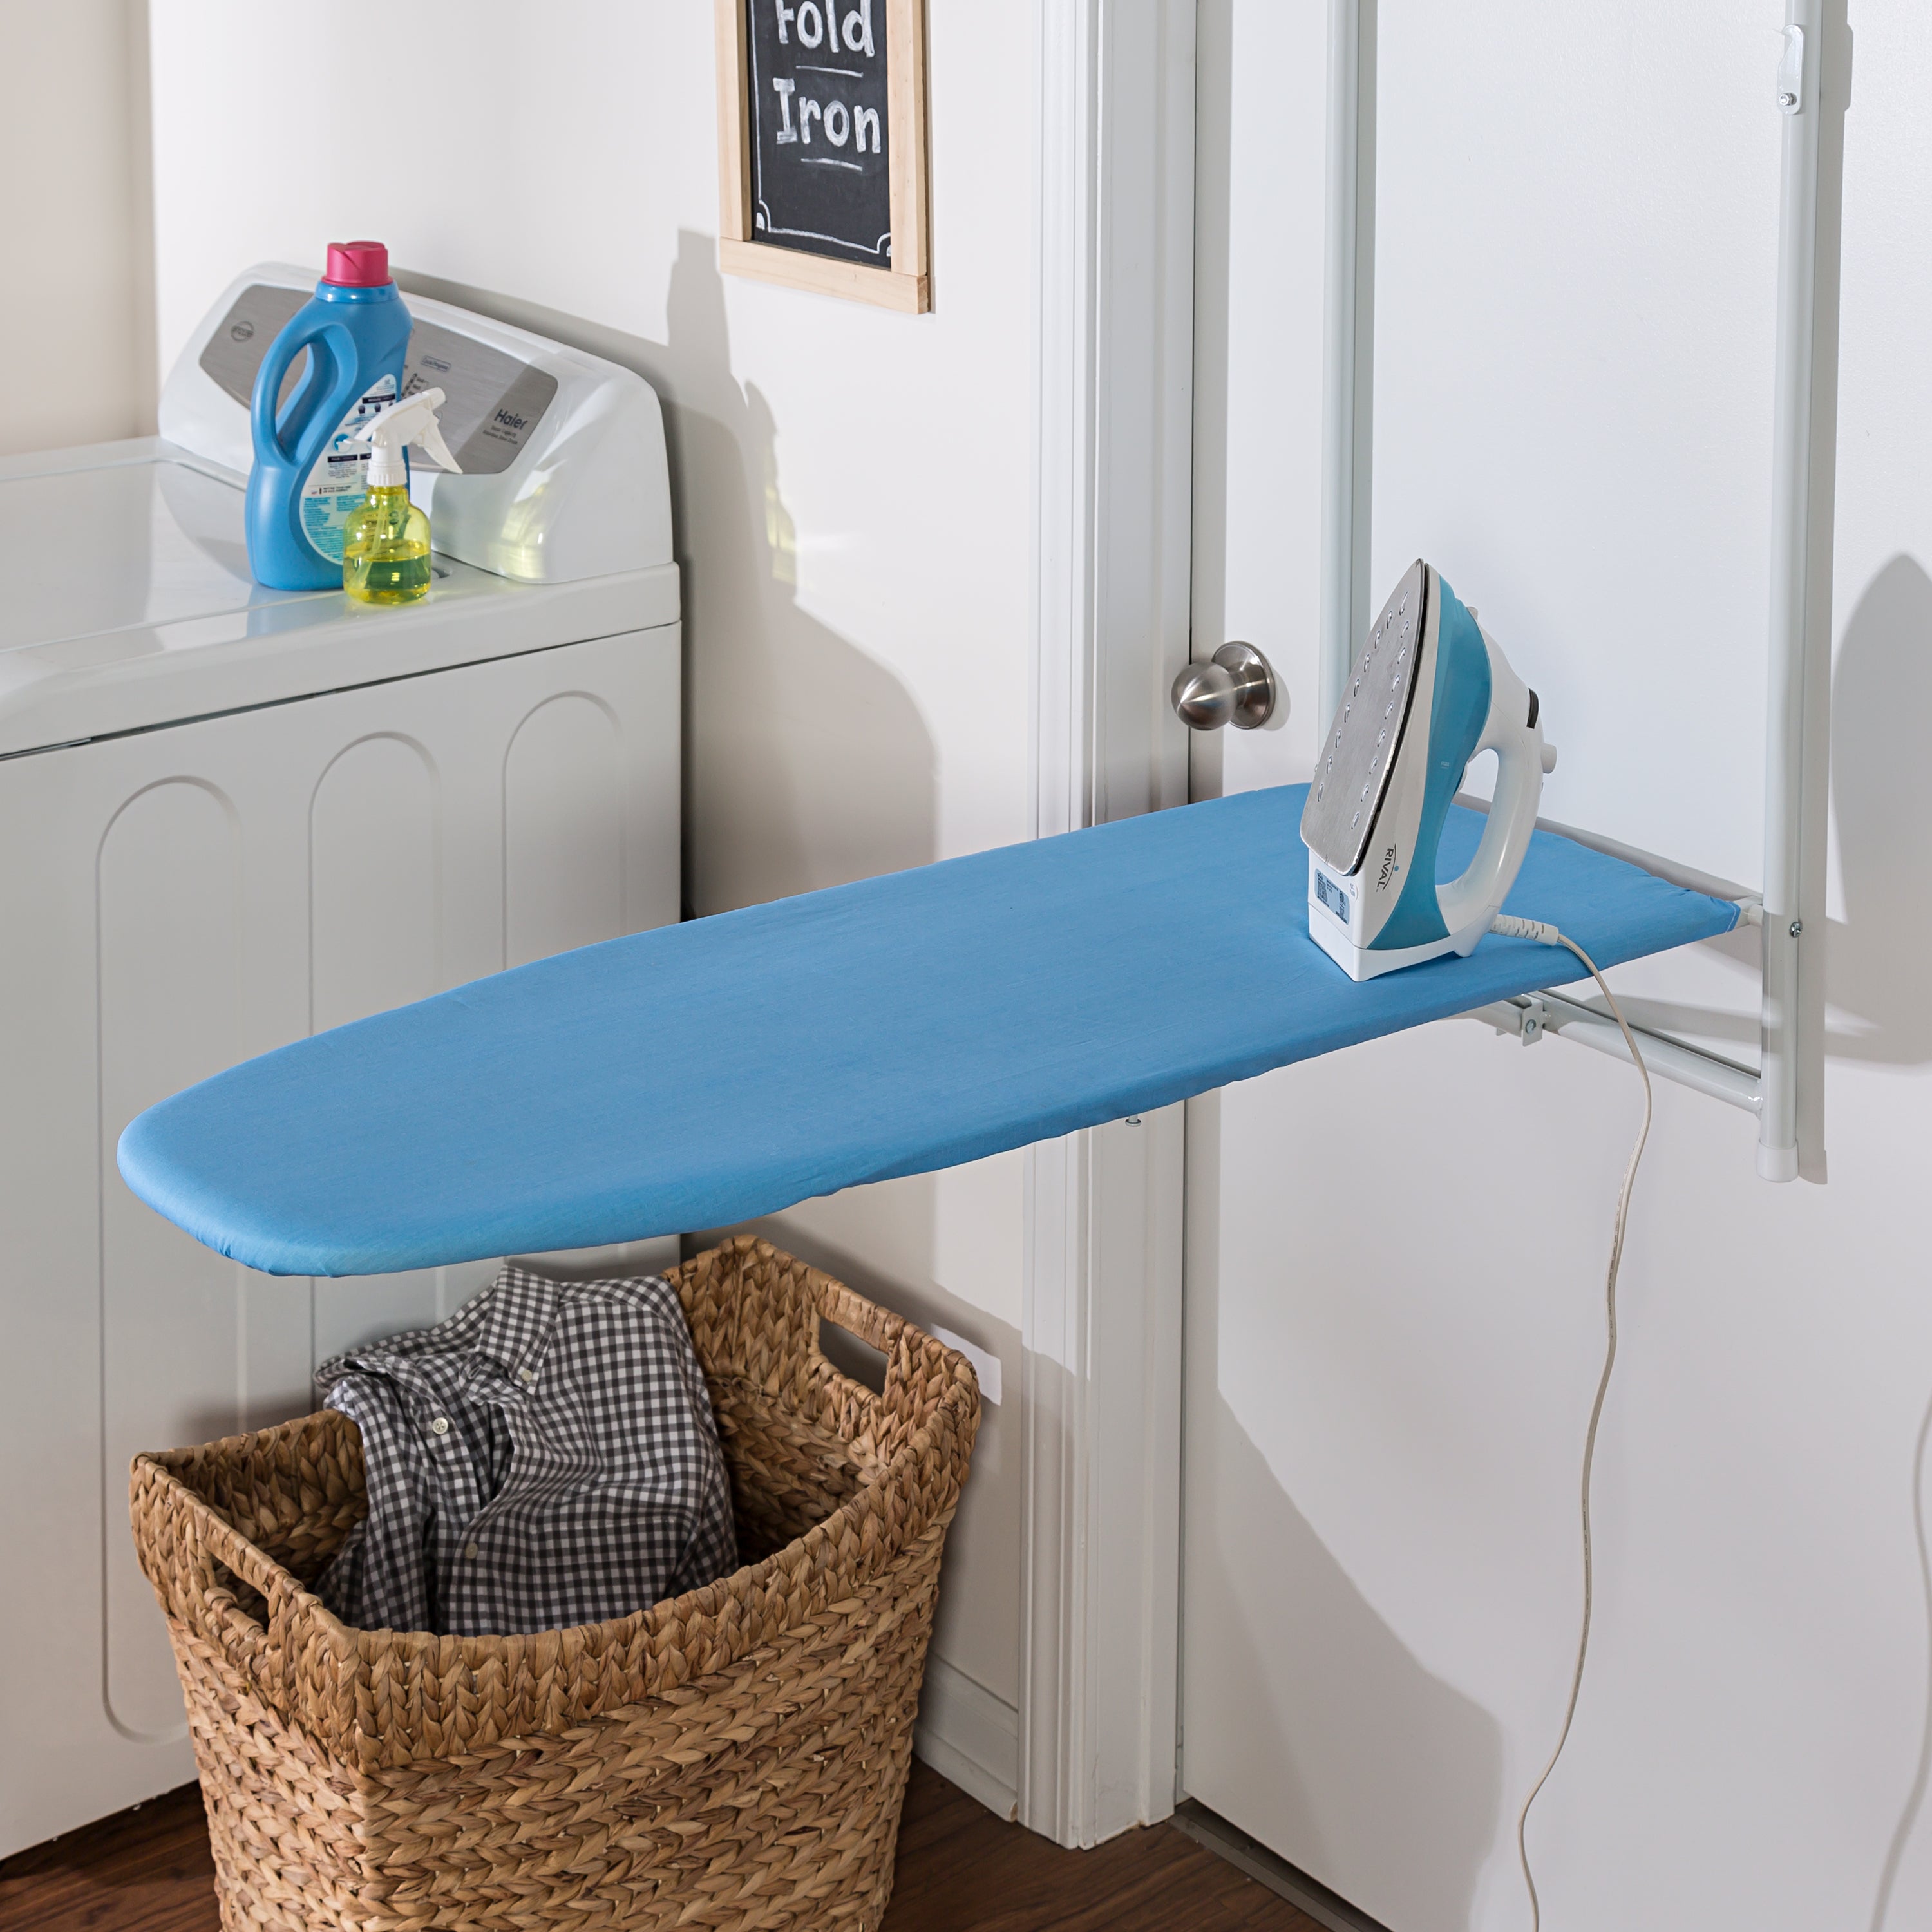 how to build drop down ironing board